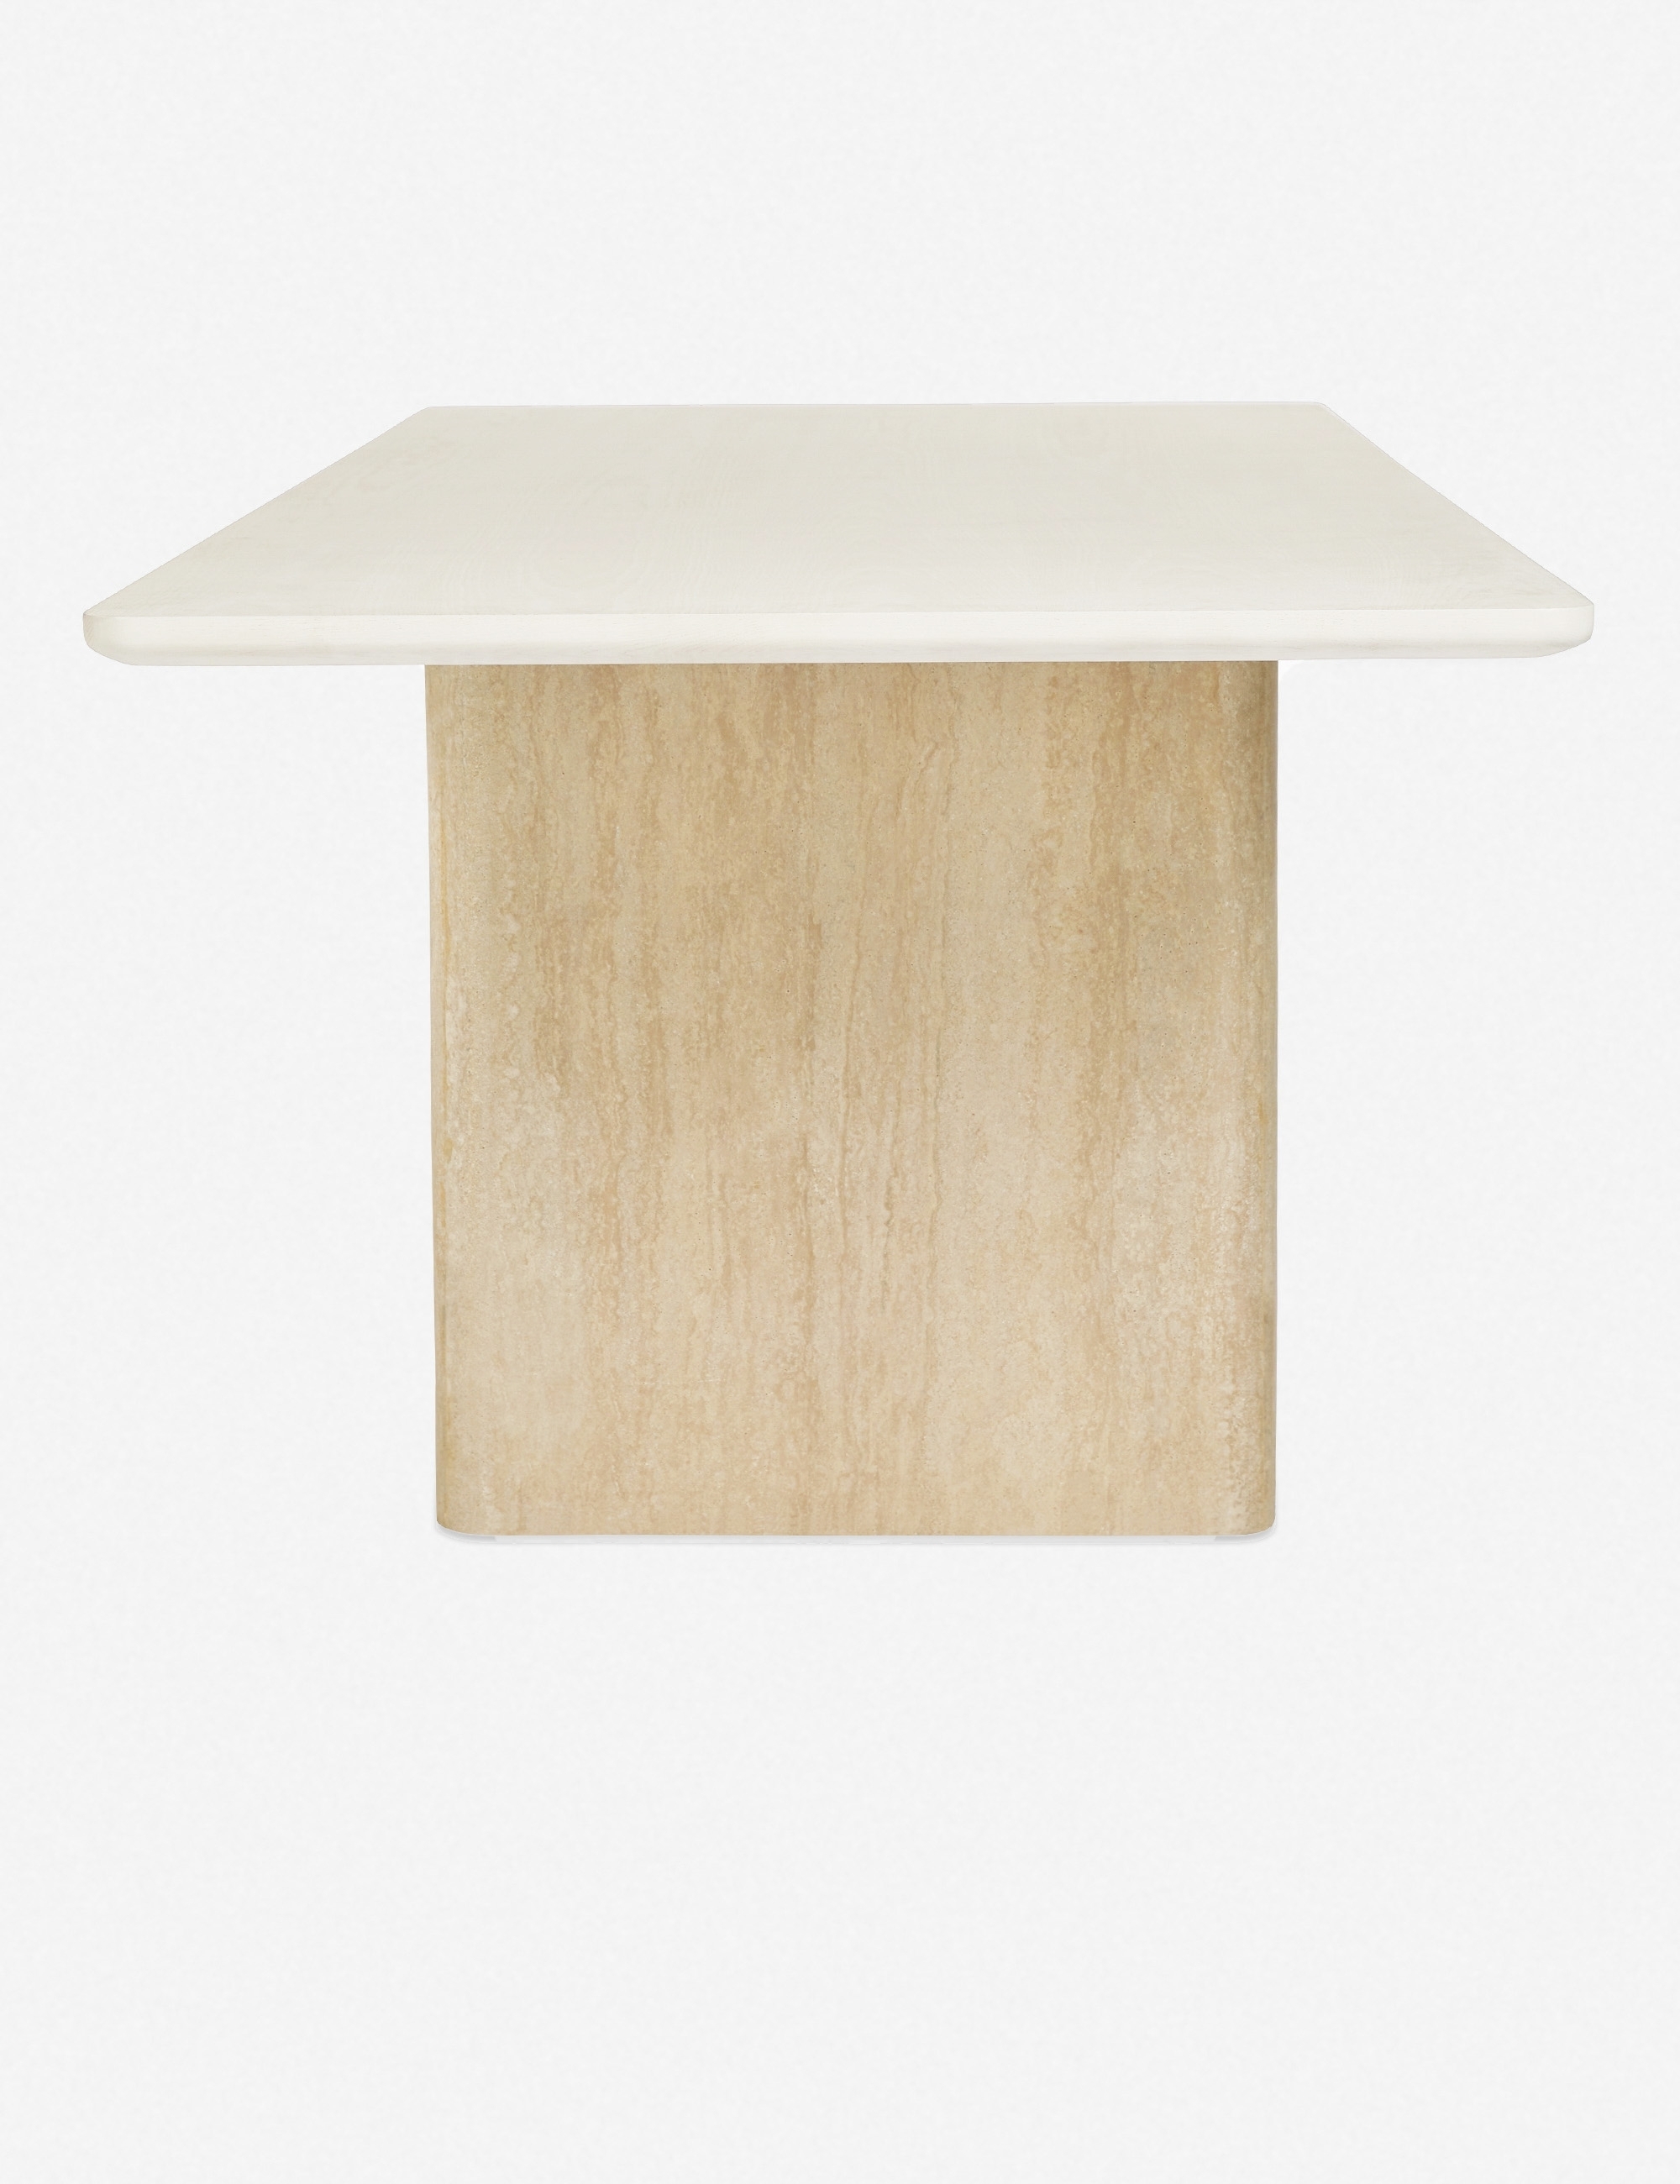 Embrey Dining Table - Image 3